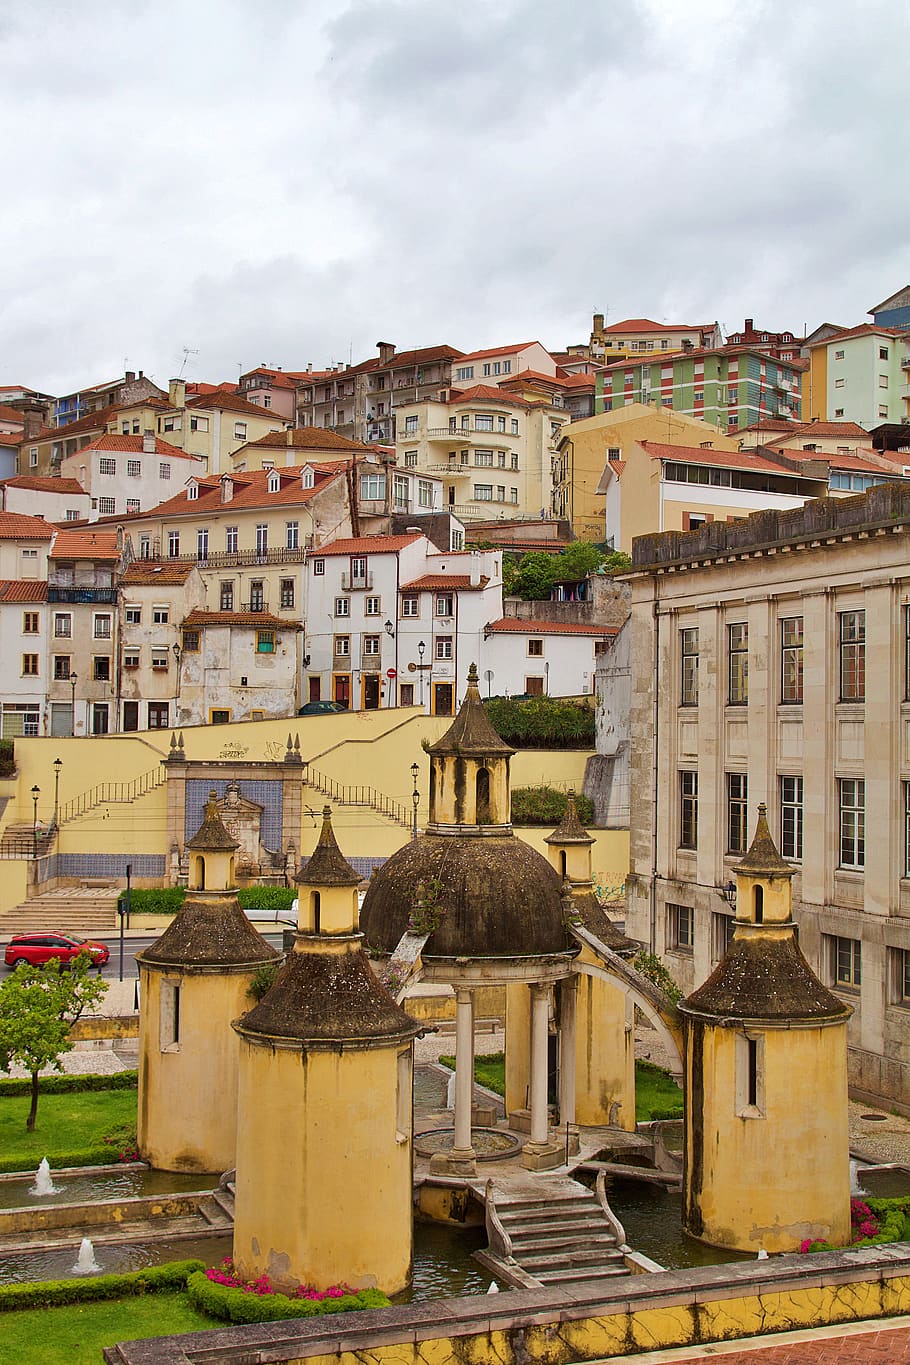 portugal, coimbra, architecture, urban, travel, city, old, historically, history, historic center